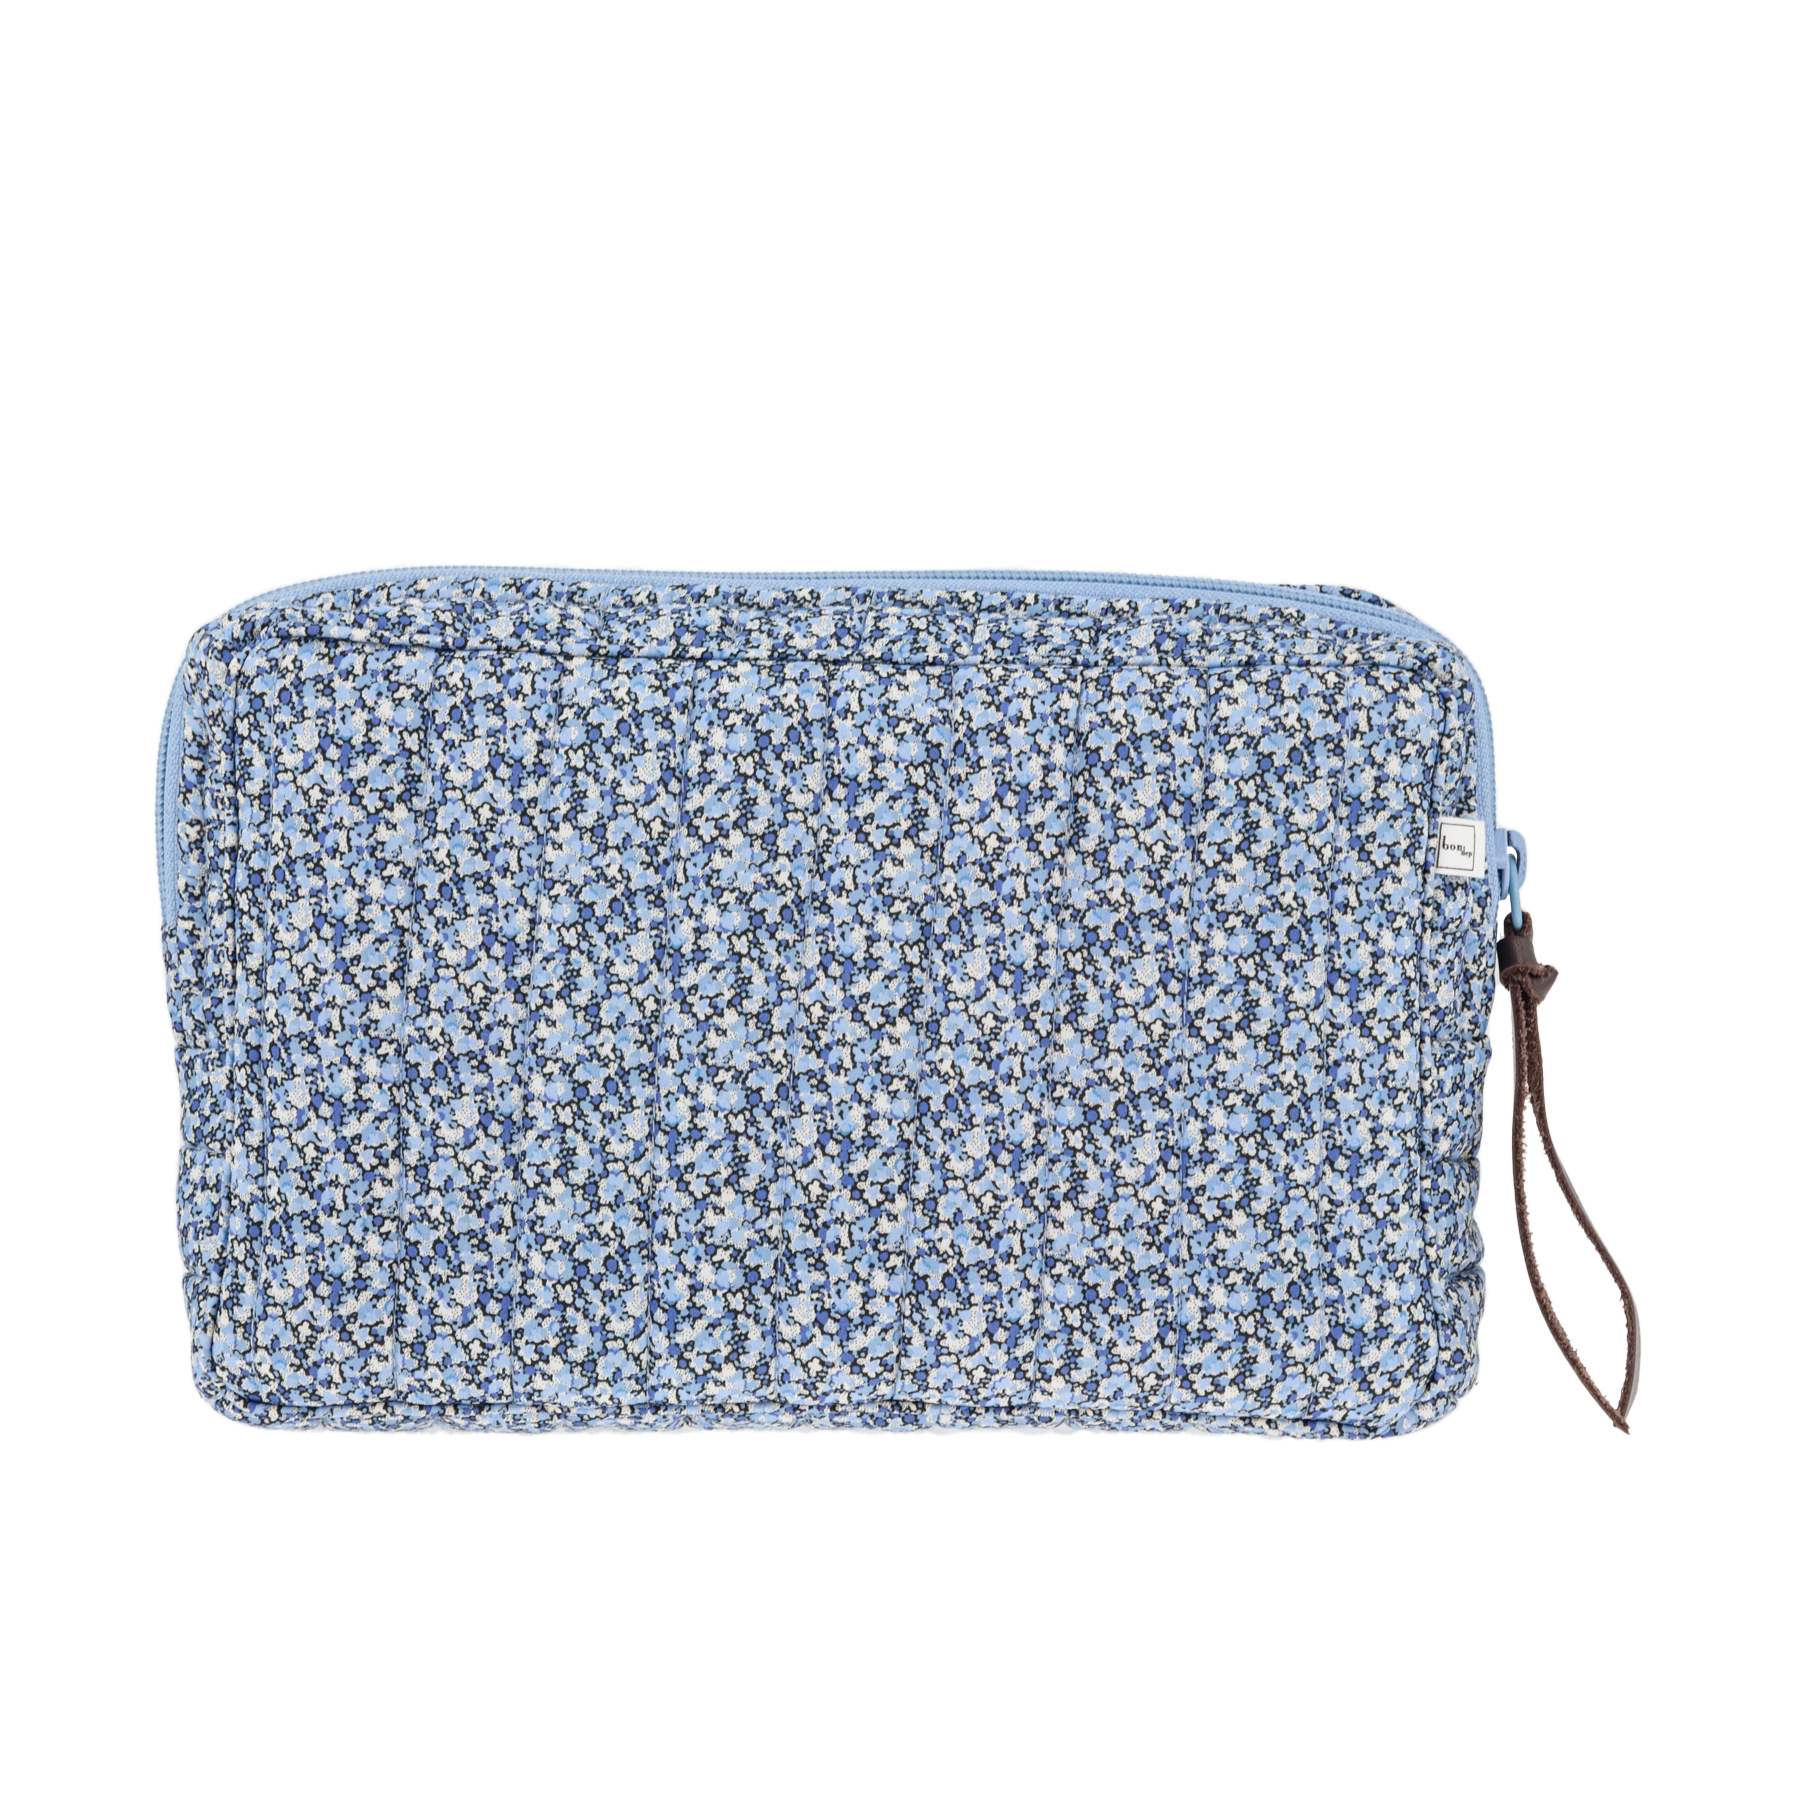 POUCH SMALL MW LIBERTY PEPPER BLUE